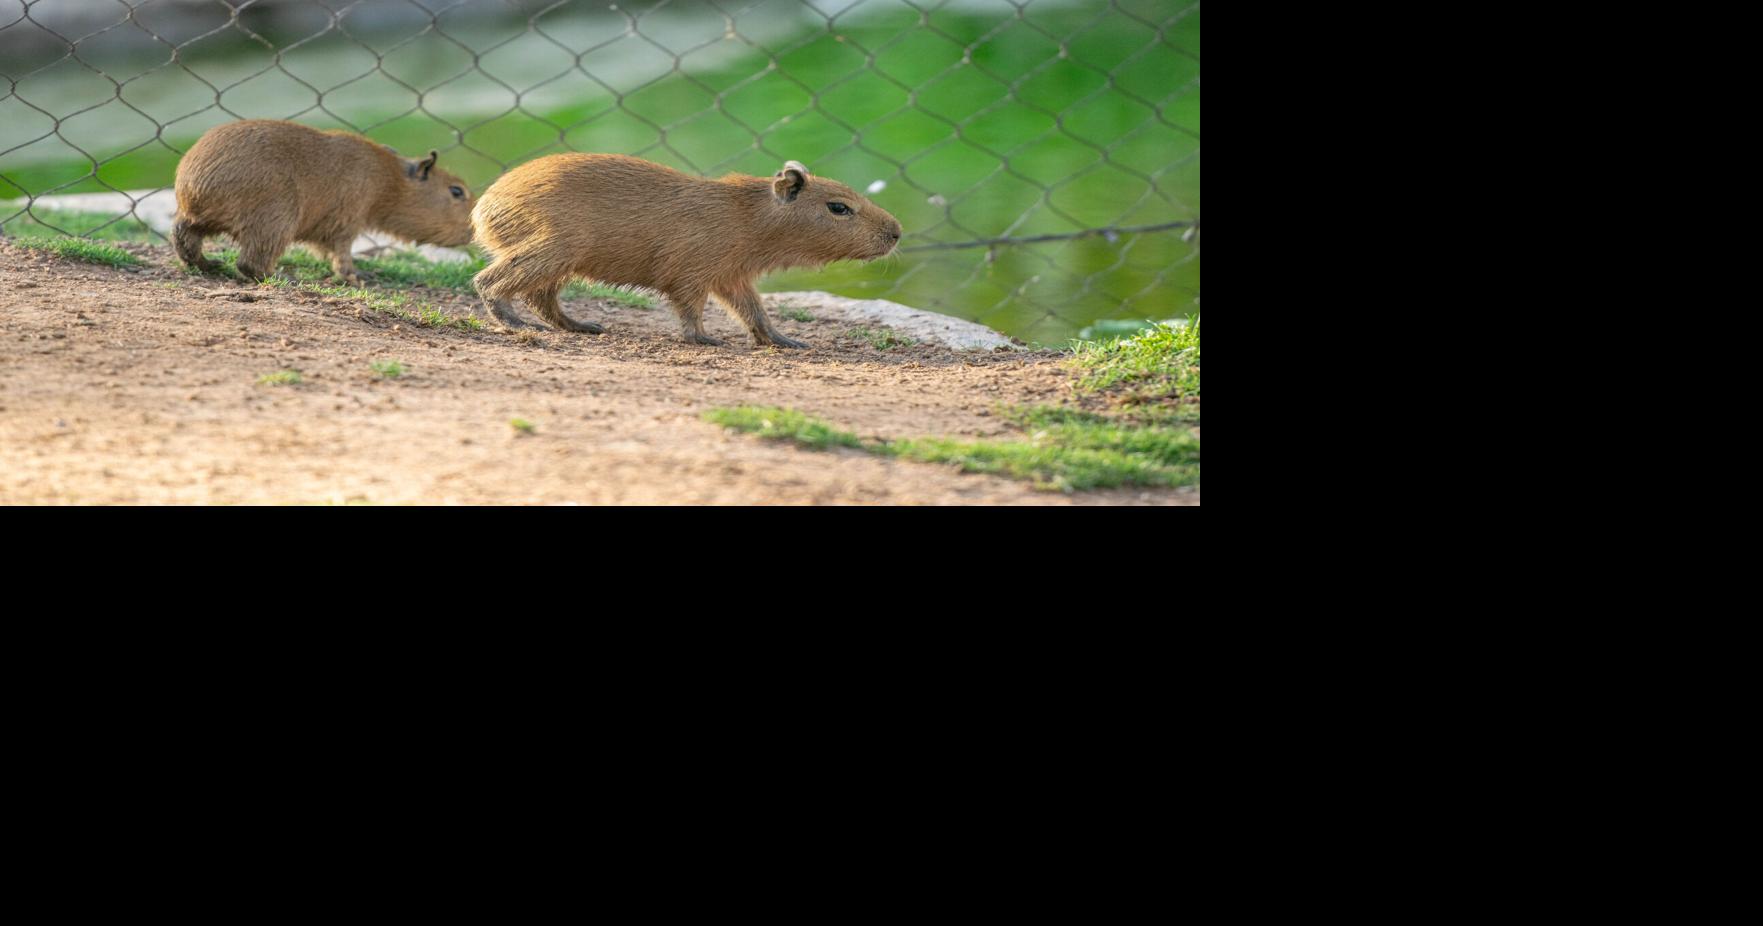 Meet the Capybaras: One of Earth's chillest animal